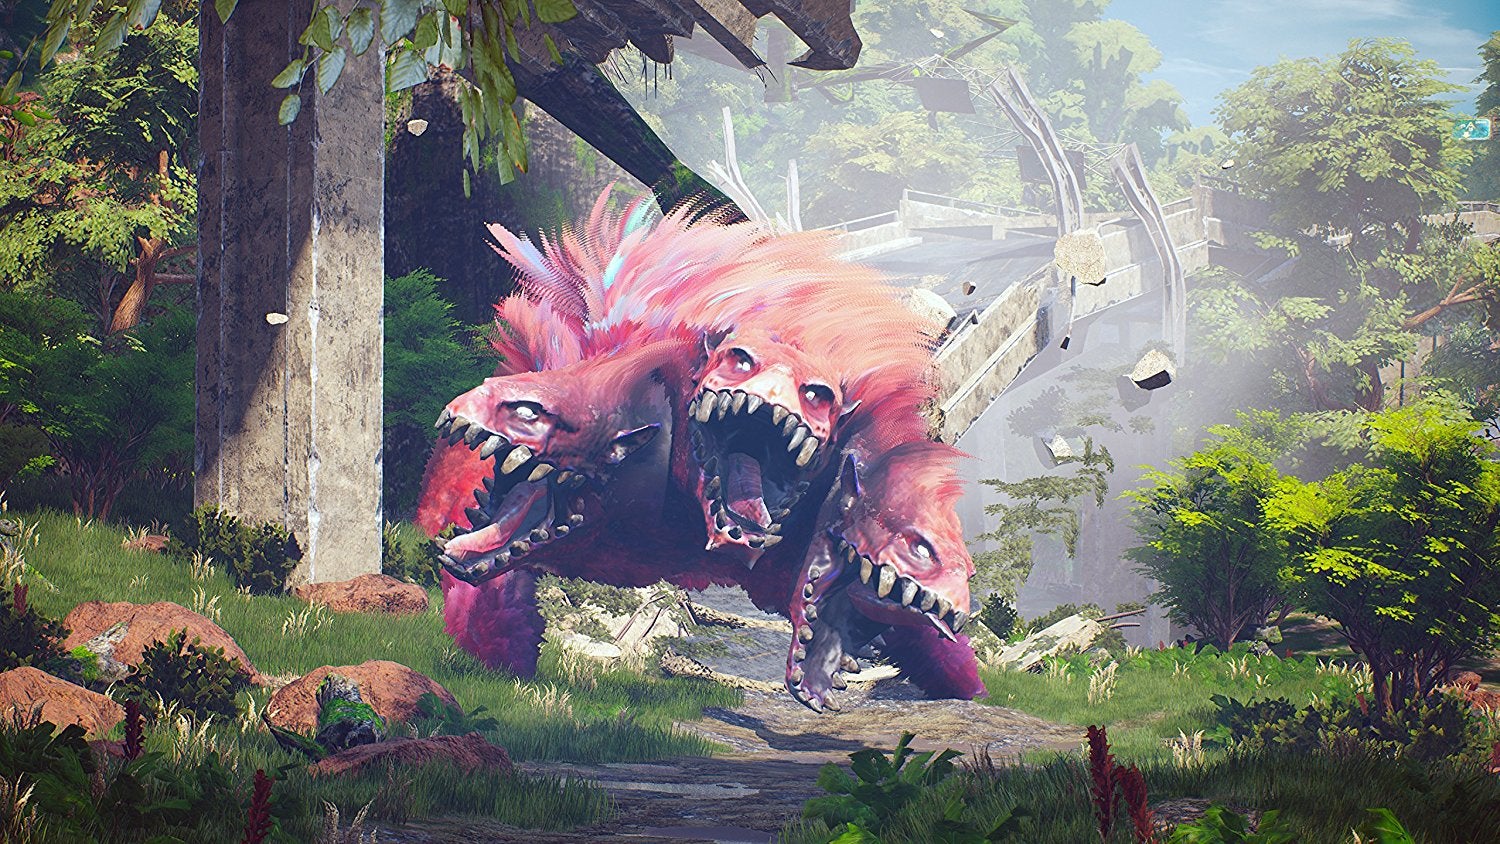 Image for No Biomutant or Darksiders 3 at E3 this year because football